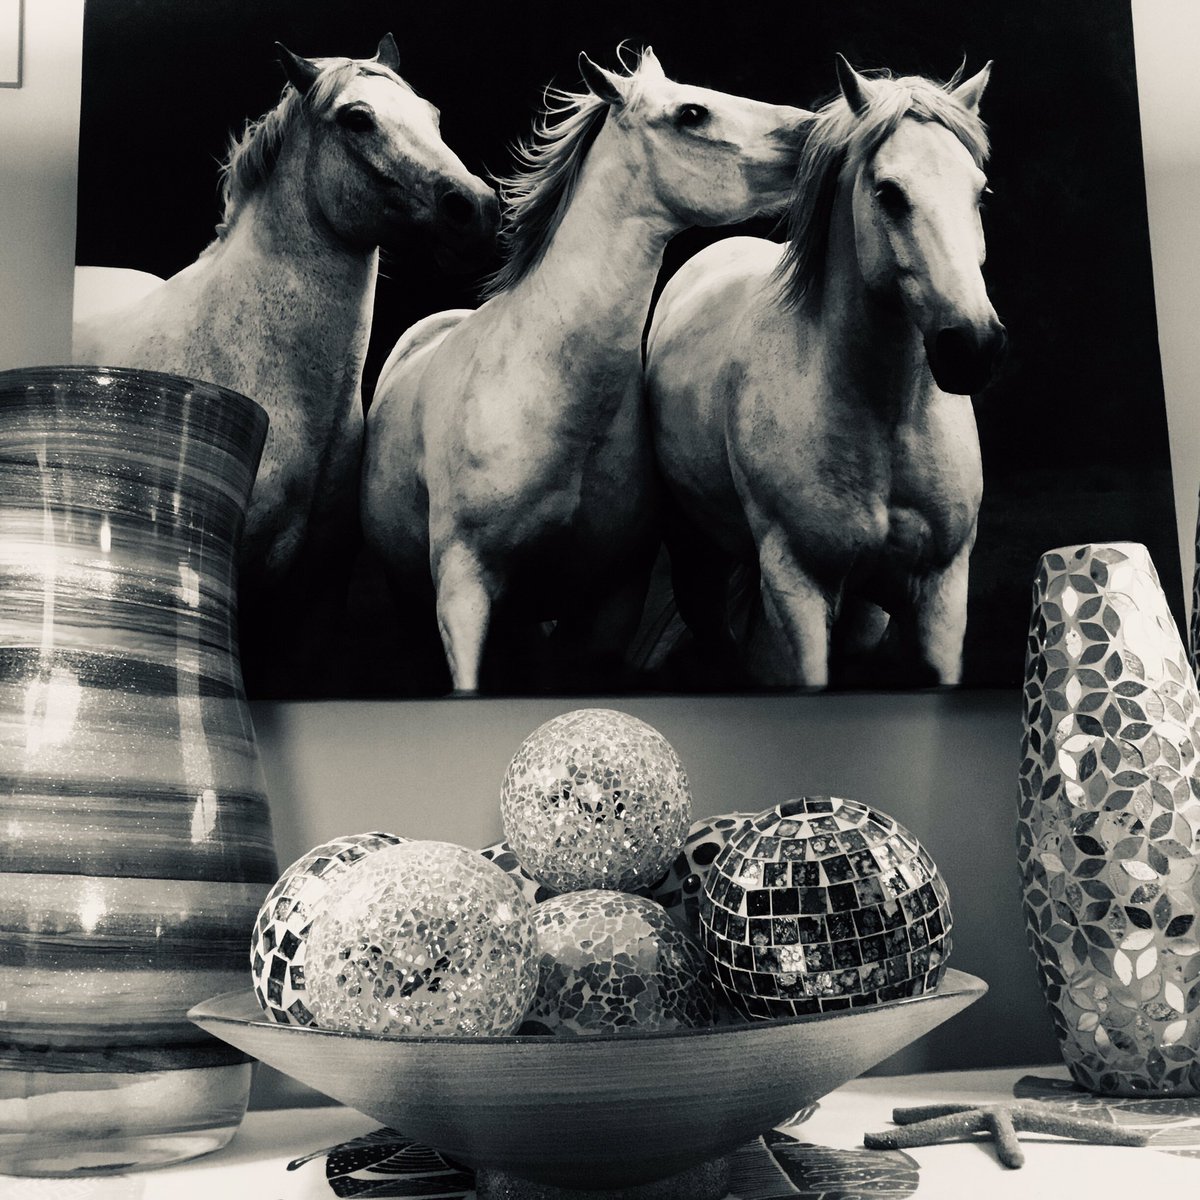 #photography #hollywood #horsepictures #beachtheme #homedecore #lights